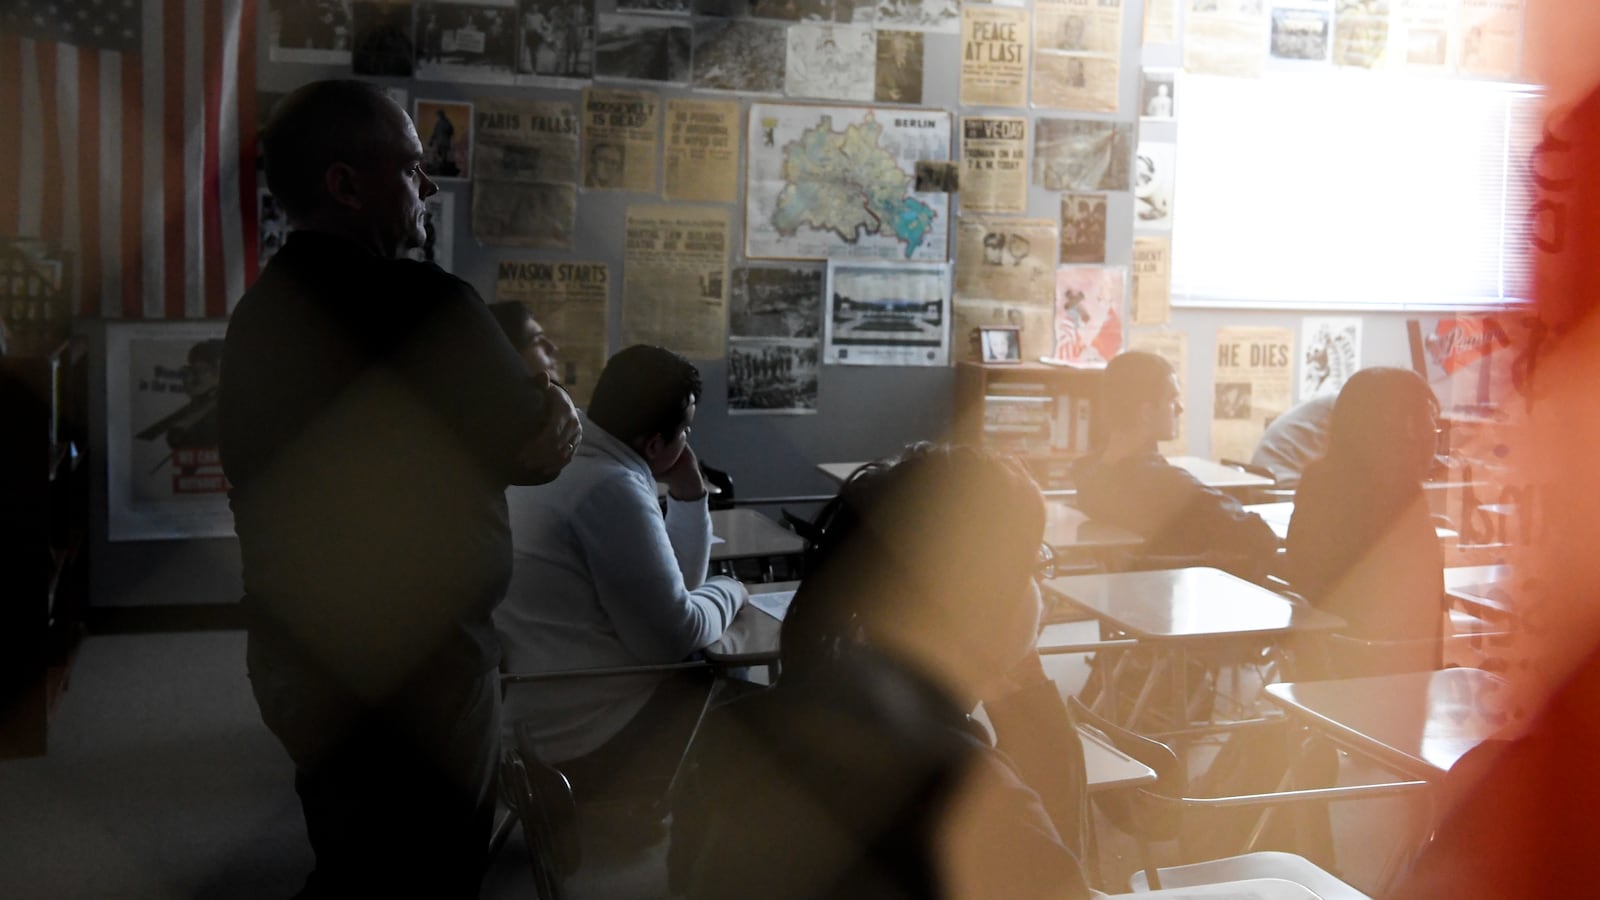 Several students sit at desks in a classroom while a teacher stands, with hazy lighting.